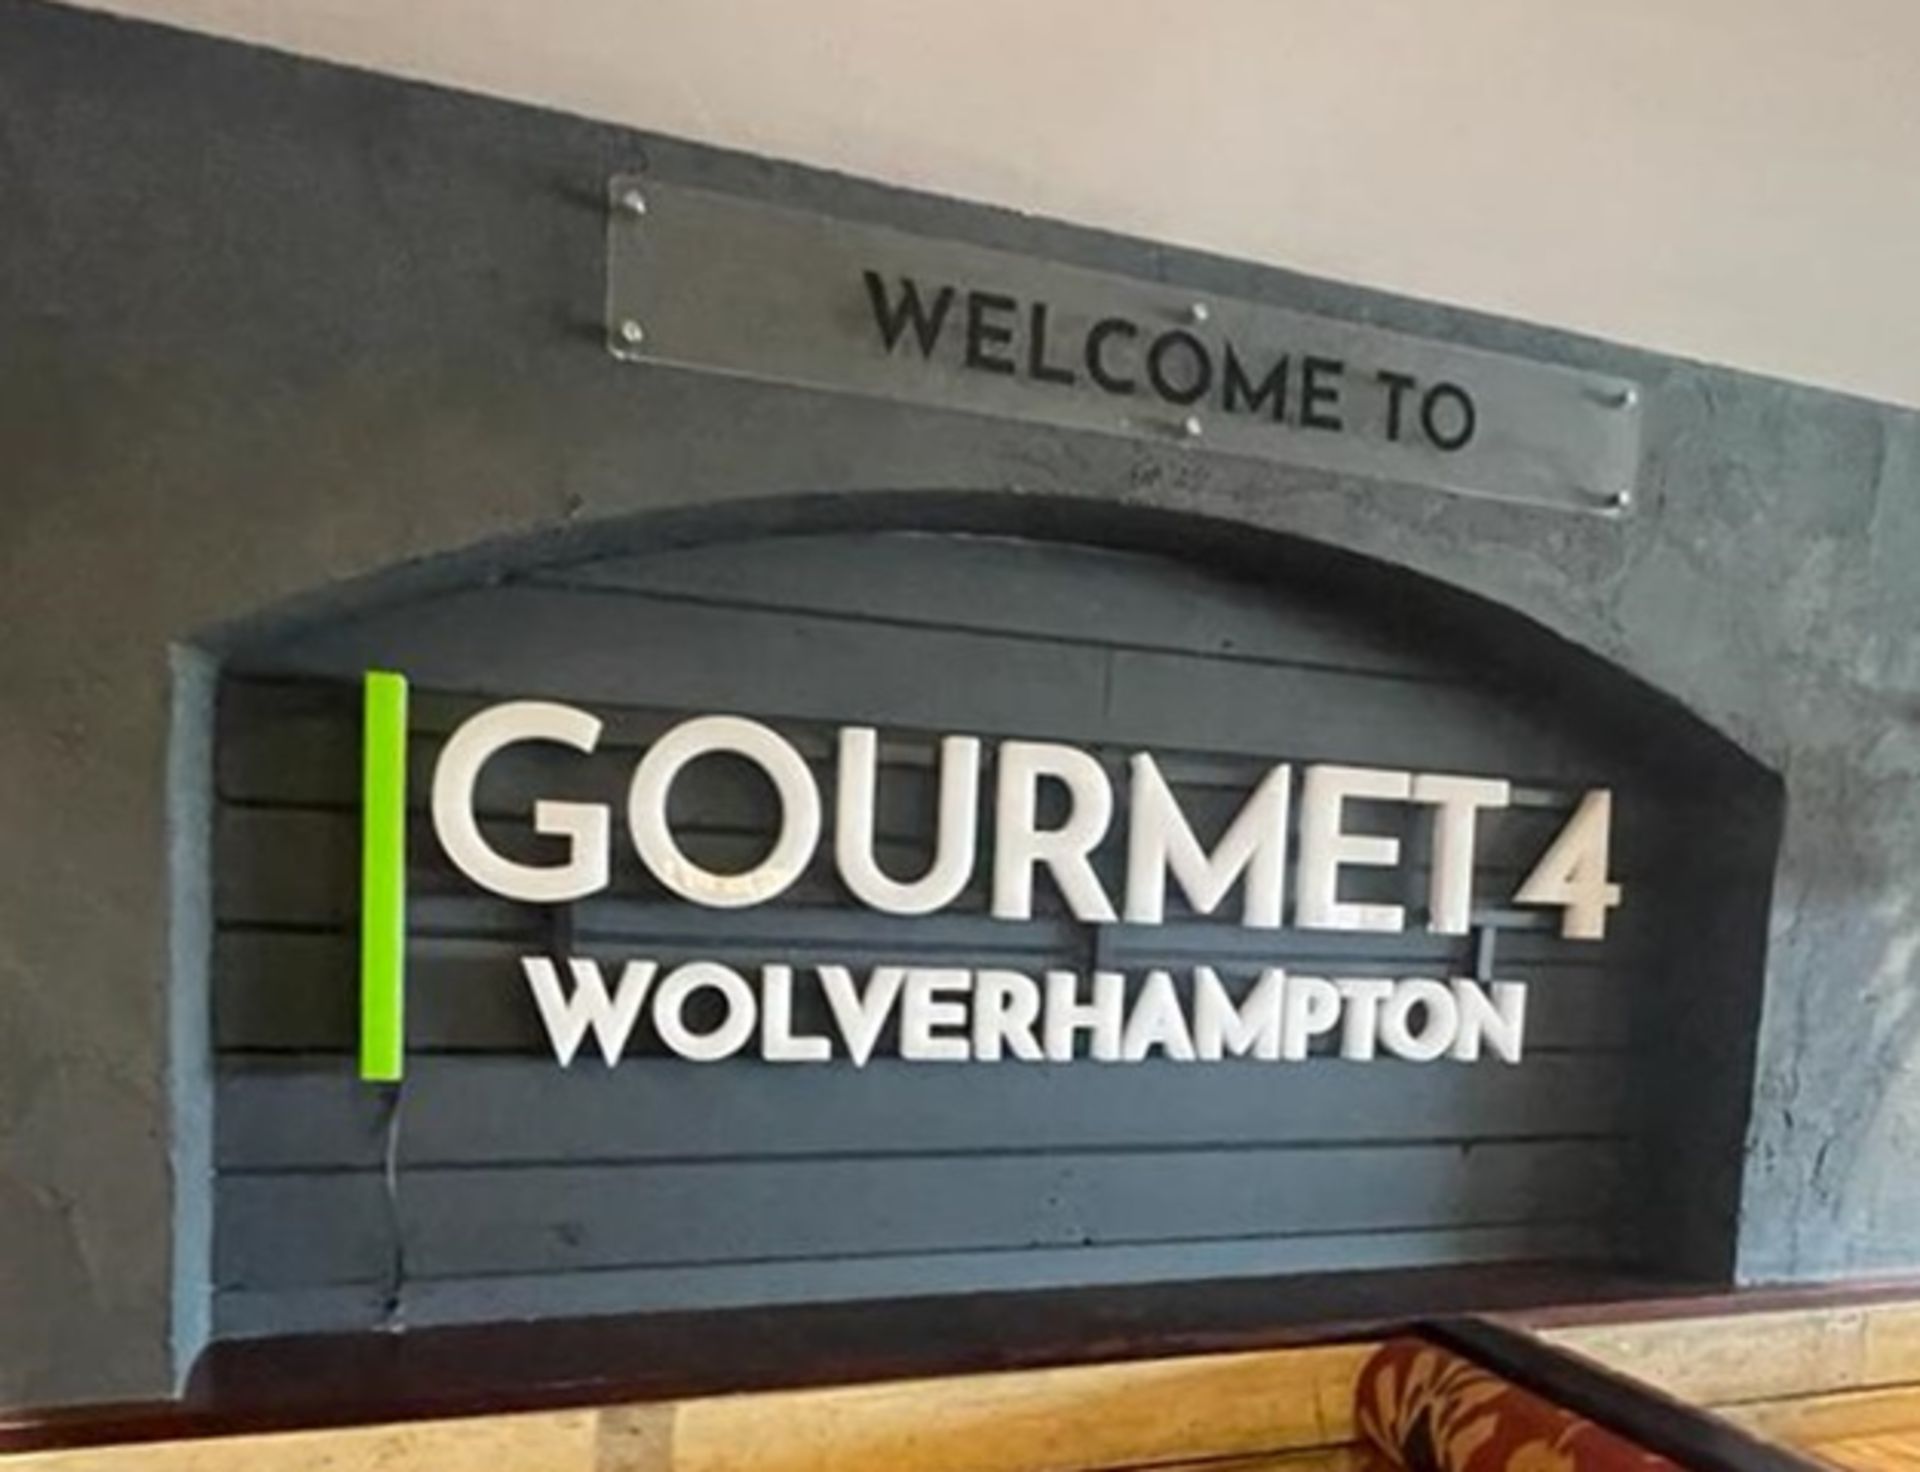 1 x Wall Mounted Illuminated Sign - Gourmet 4 Wolverhampton - Ref: 80 - CL864 - Location: - Image 2 of 7